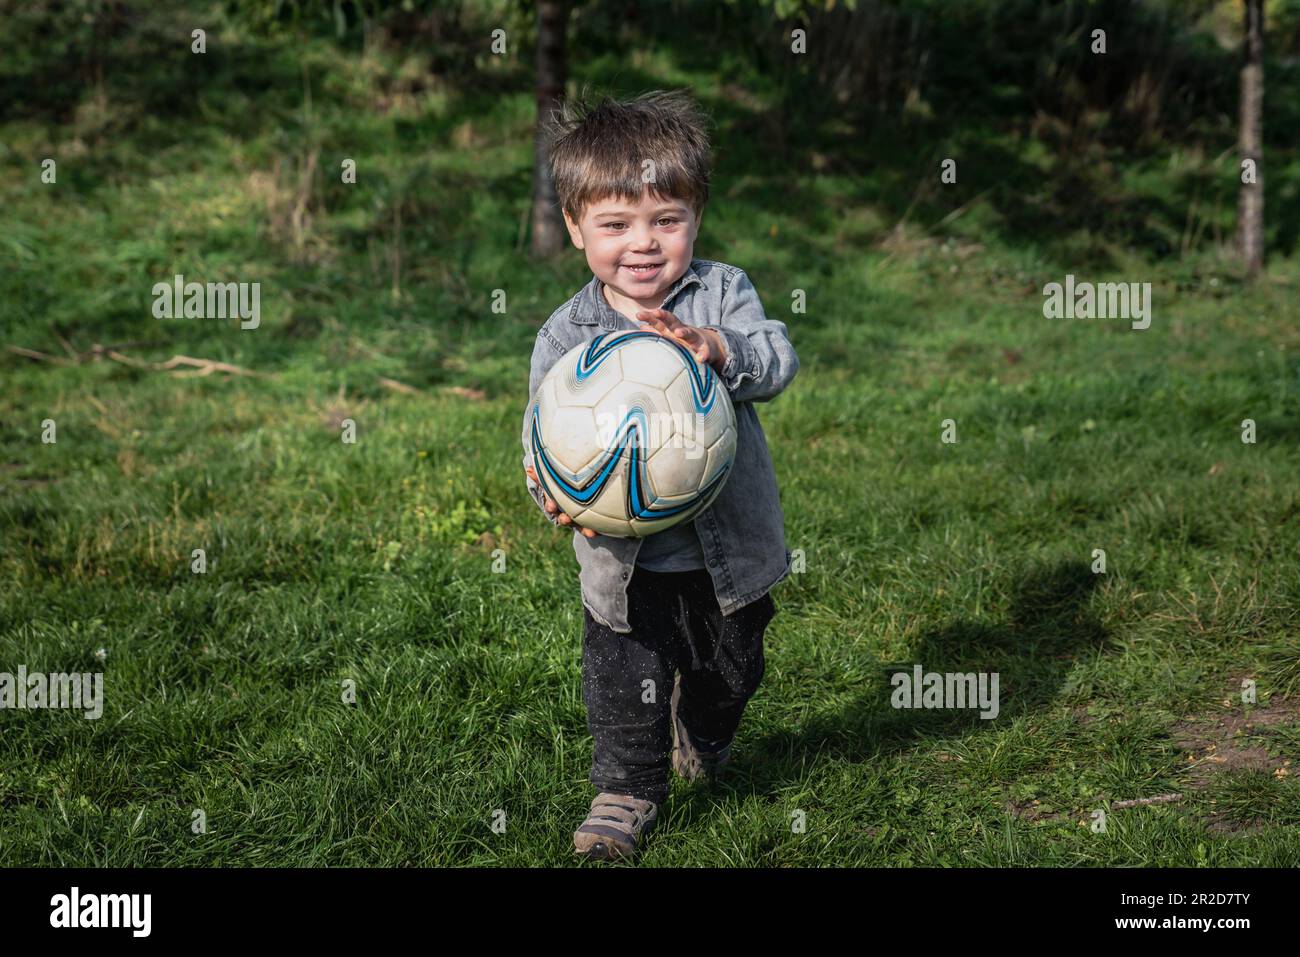 Happy kid carrying a big soccer ball is ready to play. Smiling boy engaging in an outdoor football activity conveys a healthy growth and lifestyle Stock Photo